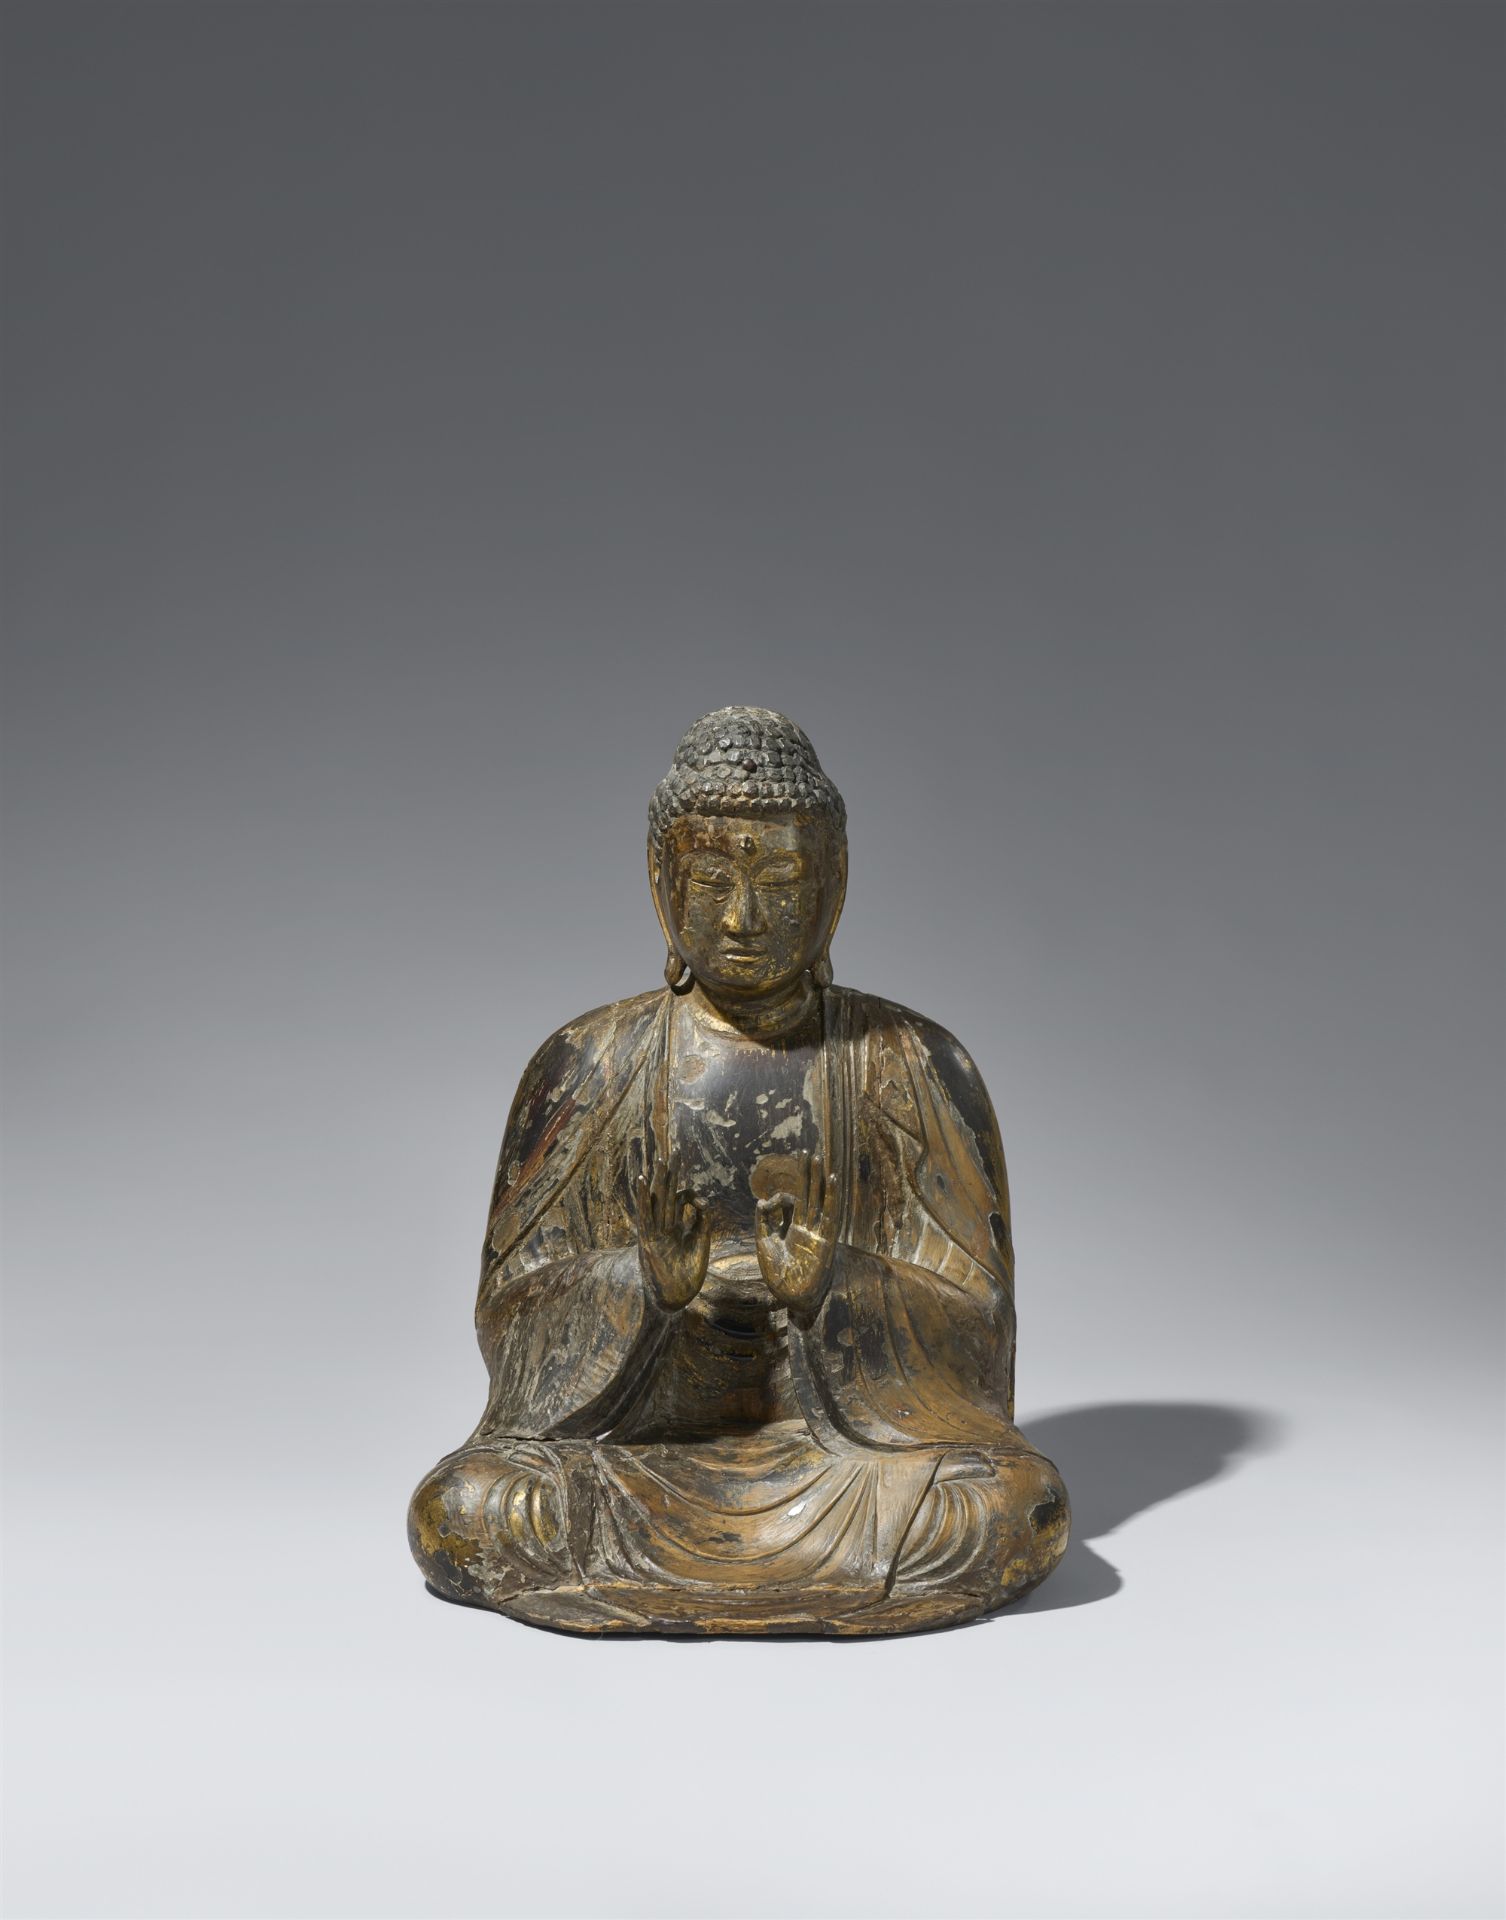 A wood figure of a Buddha. 12th century or later